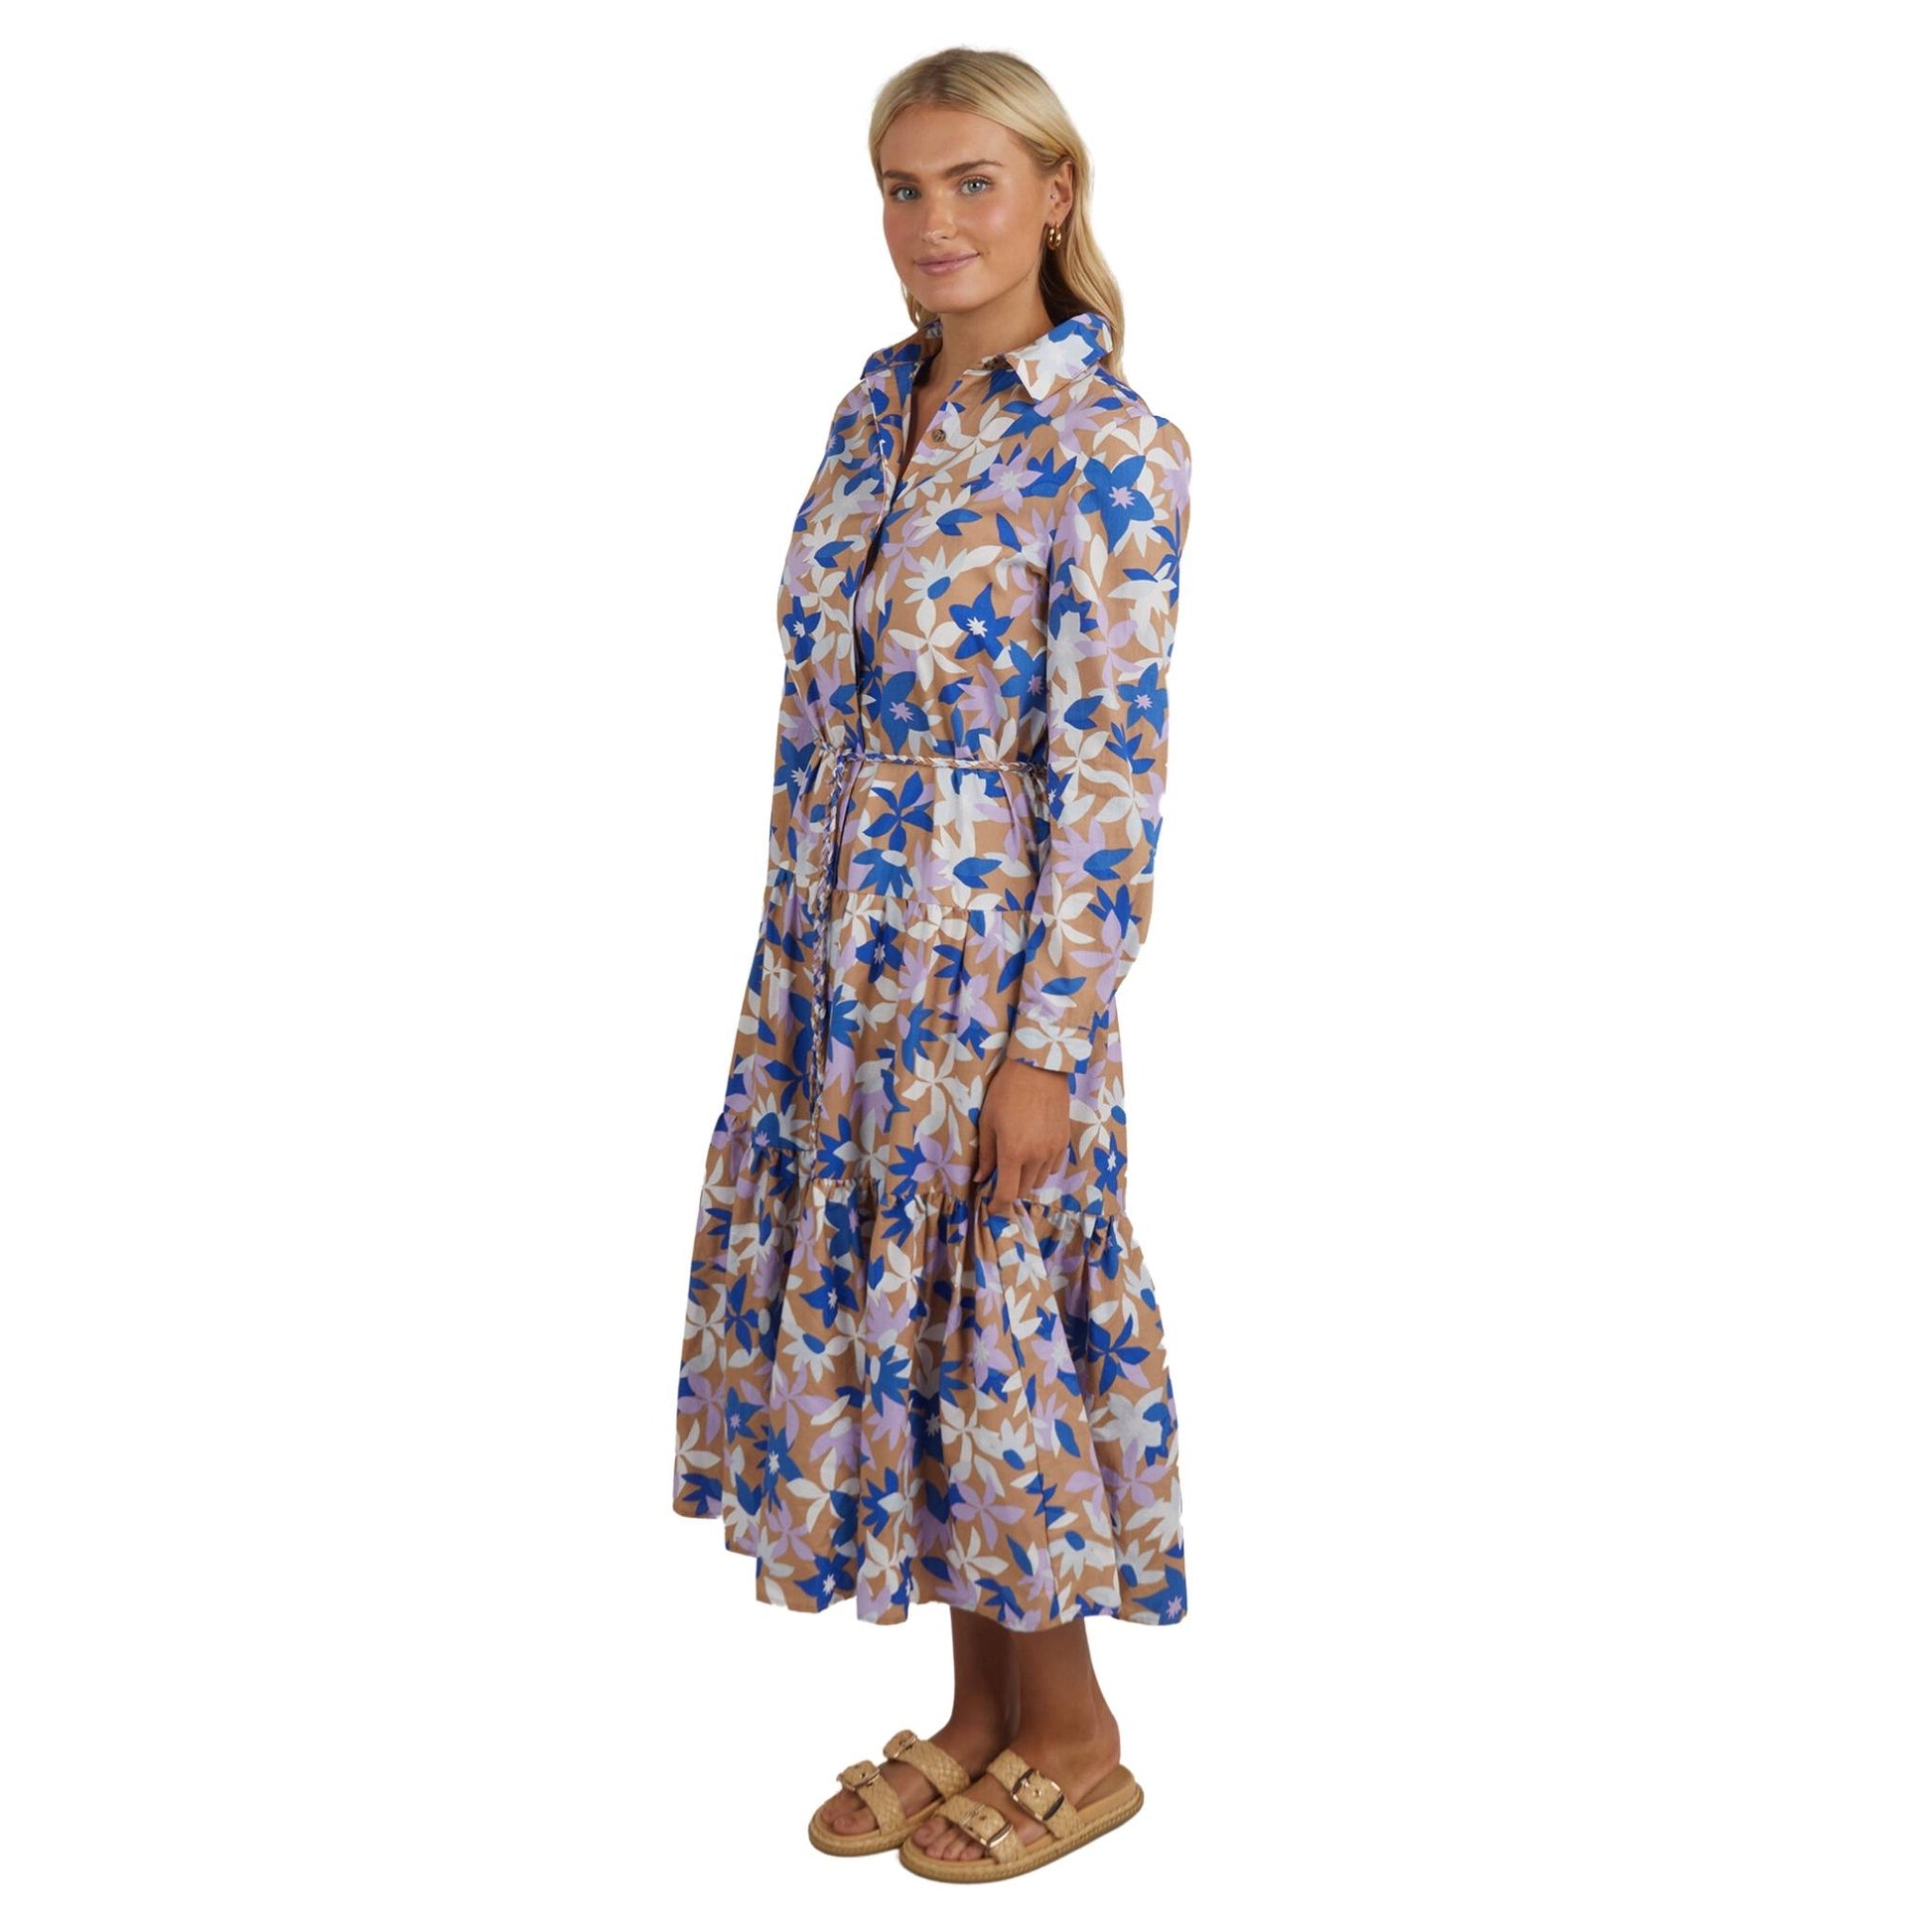 This pretty shirt style floral print dress features a button front and cuff and a cute collar. With a gently tiered skirt, hidden pockets, a self tie belt the Marguerite dress from Elm features blue and white abstract flowers on a coffee coloured base